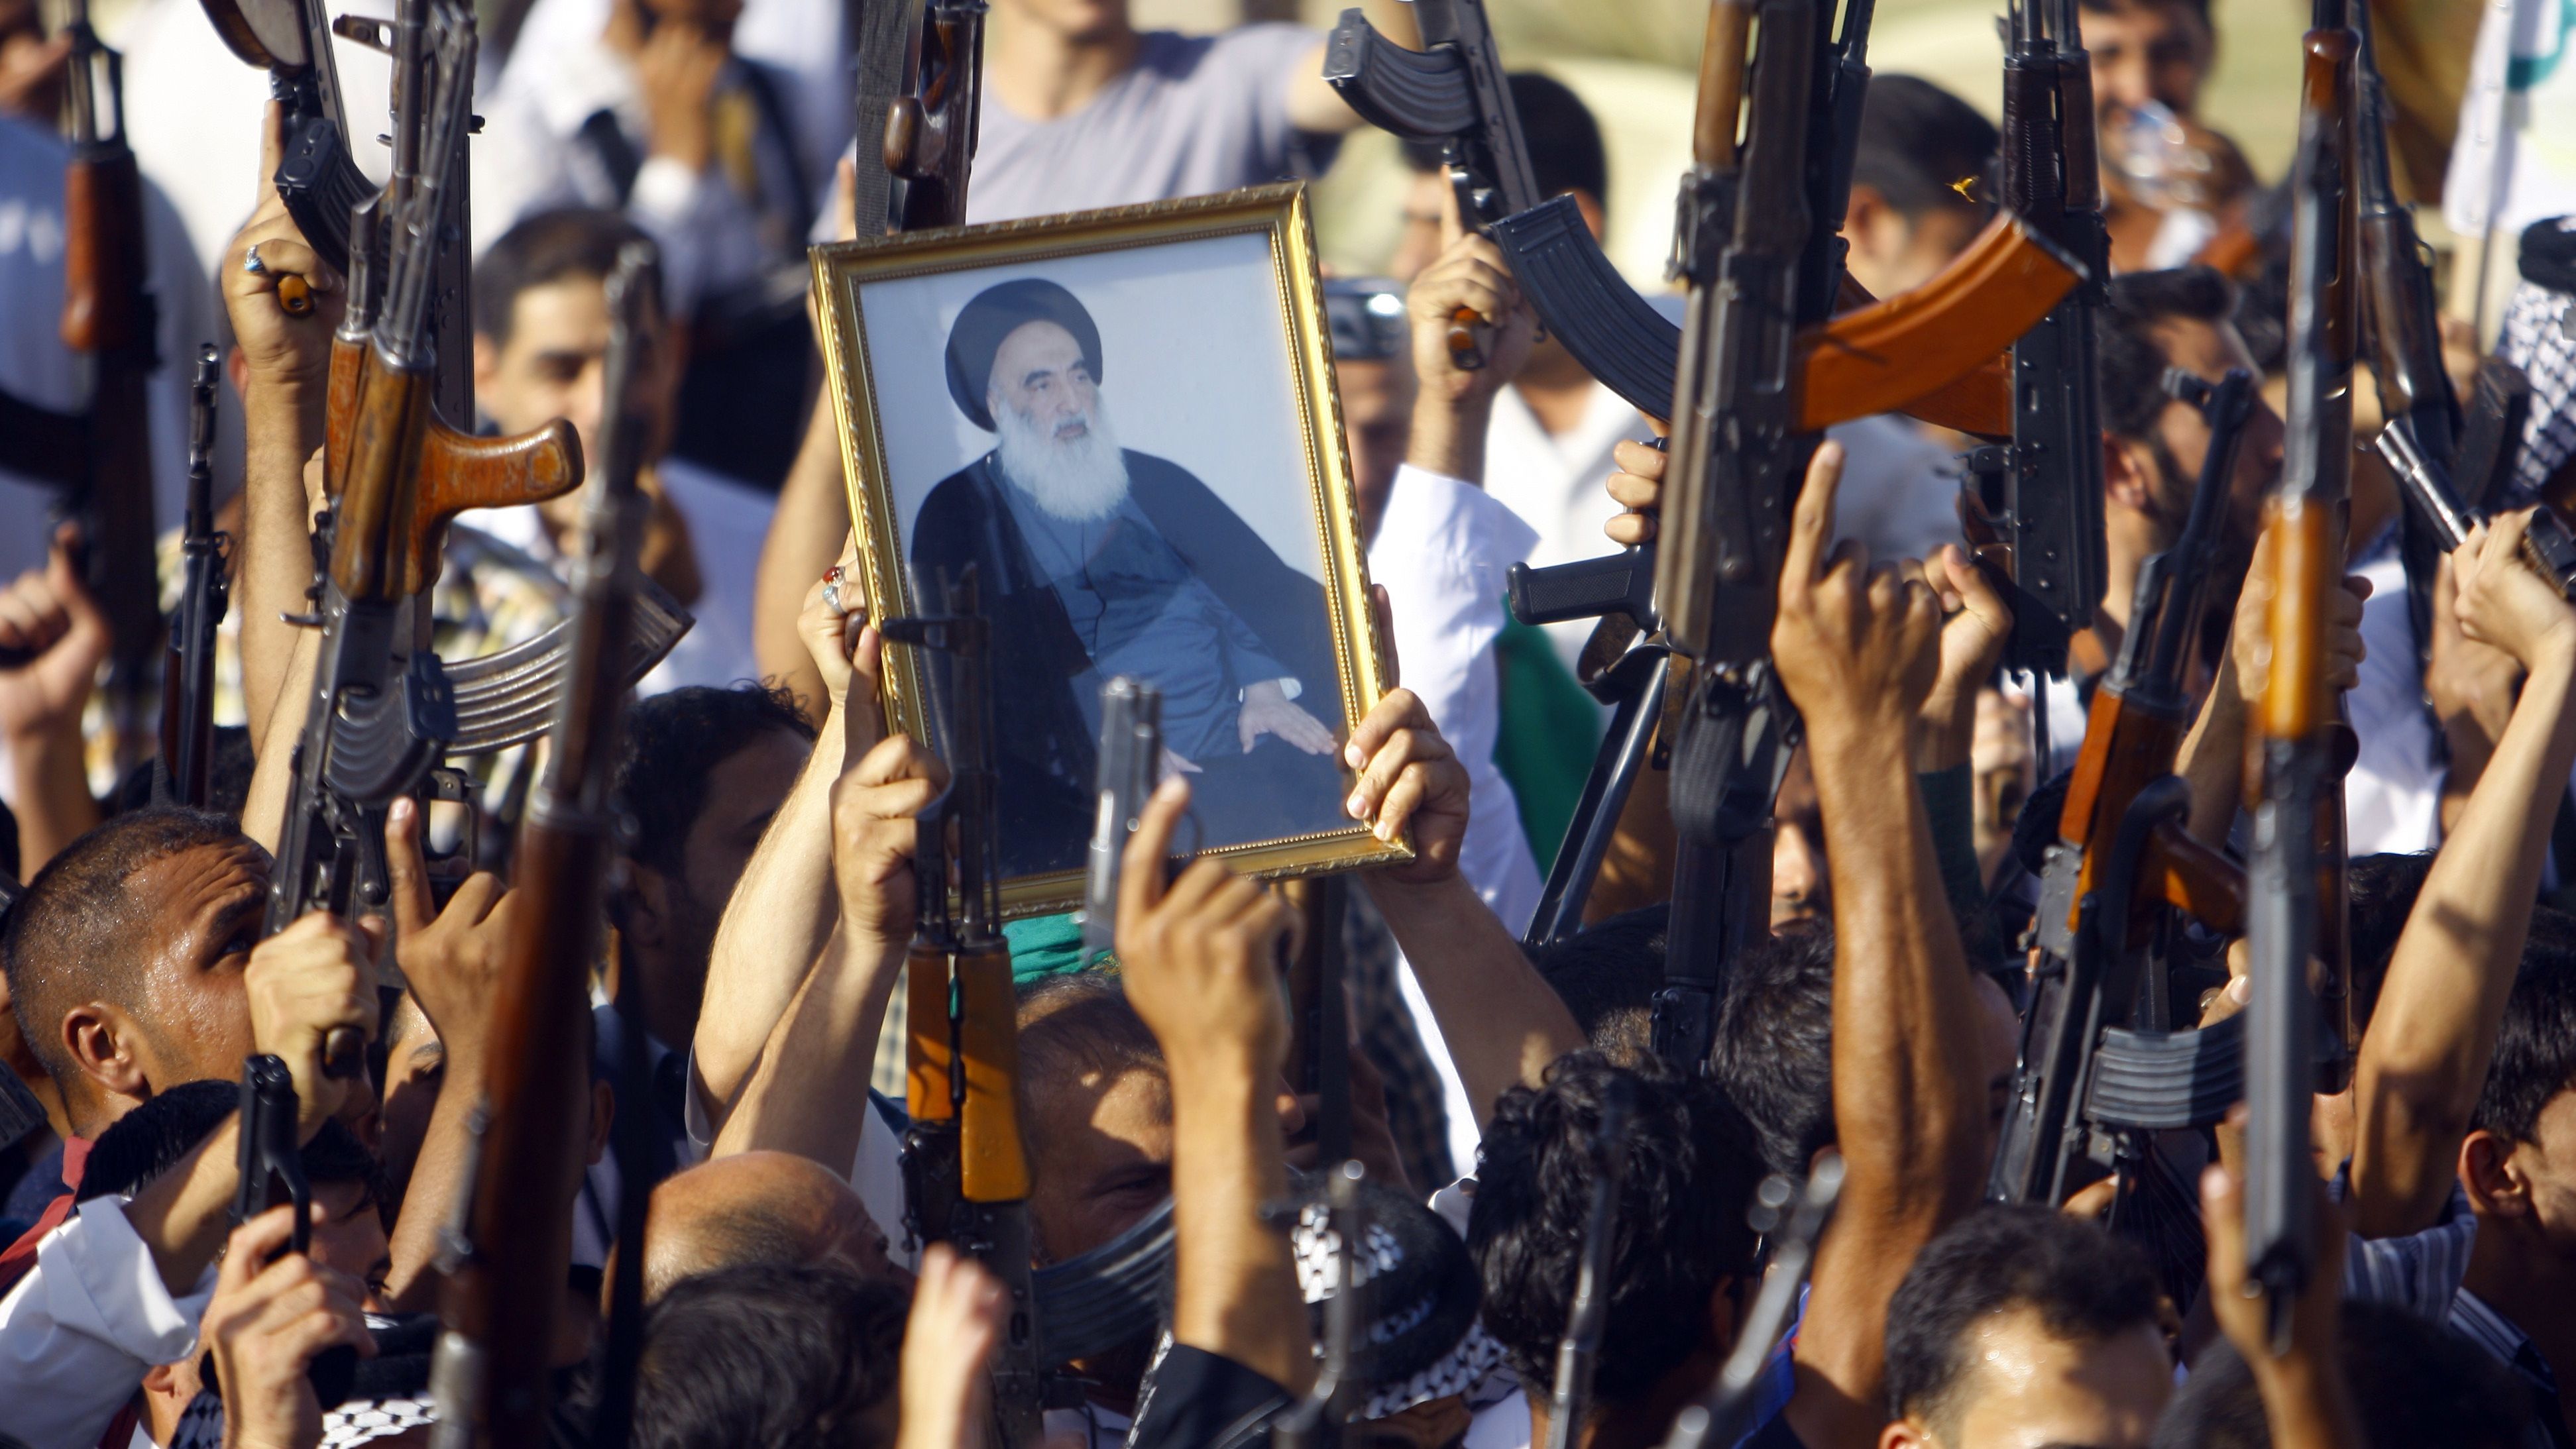 Iraqi Shiite tribesmen brandish their weapons and a poster of Shiite cleric Grand Ayatollah Ali al-Sistani in June 2014, as they gather to show their willingness to join Iraqi security forces in the fight against militants who'd taken over several northern Iraqi cities.